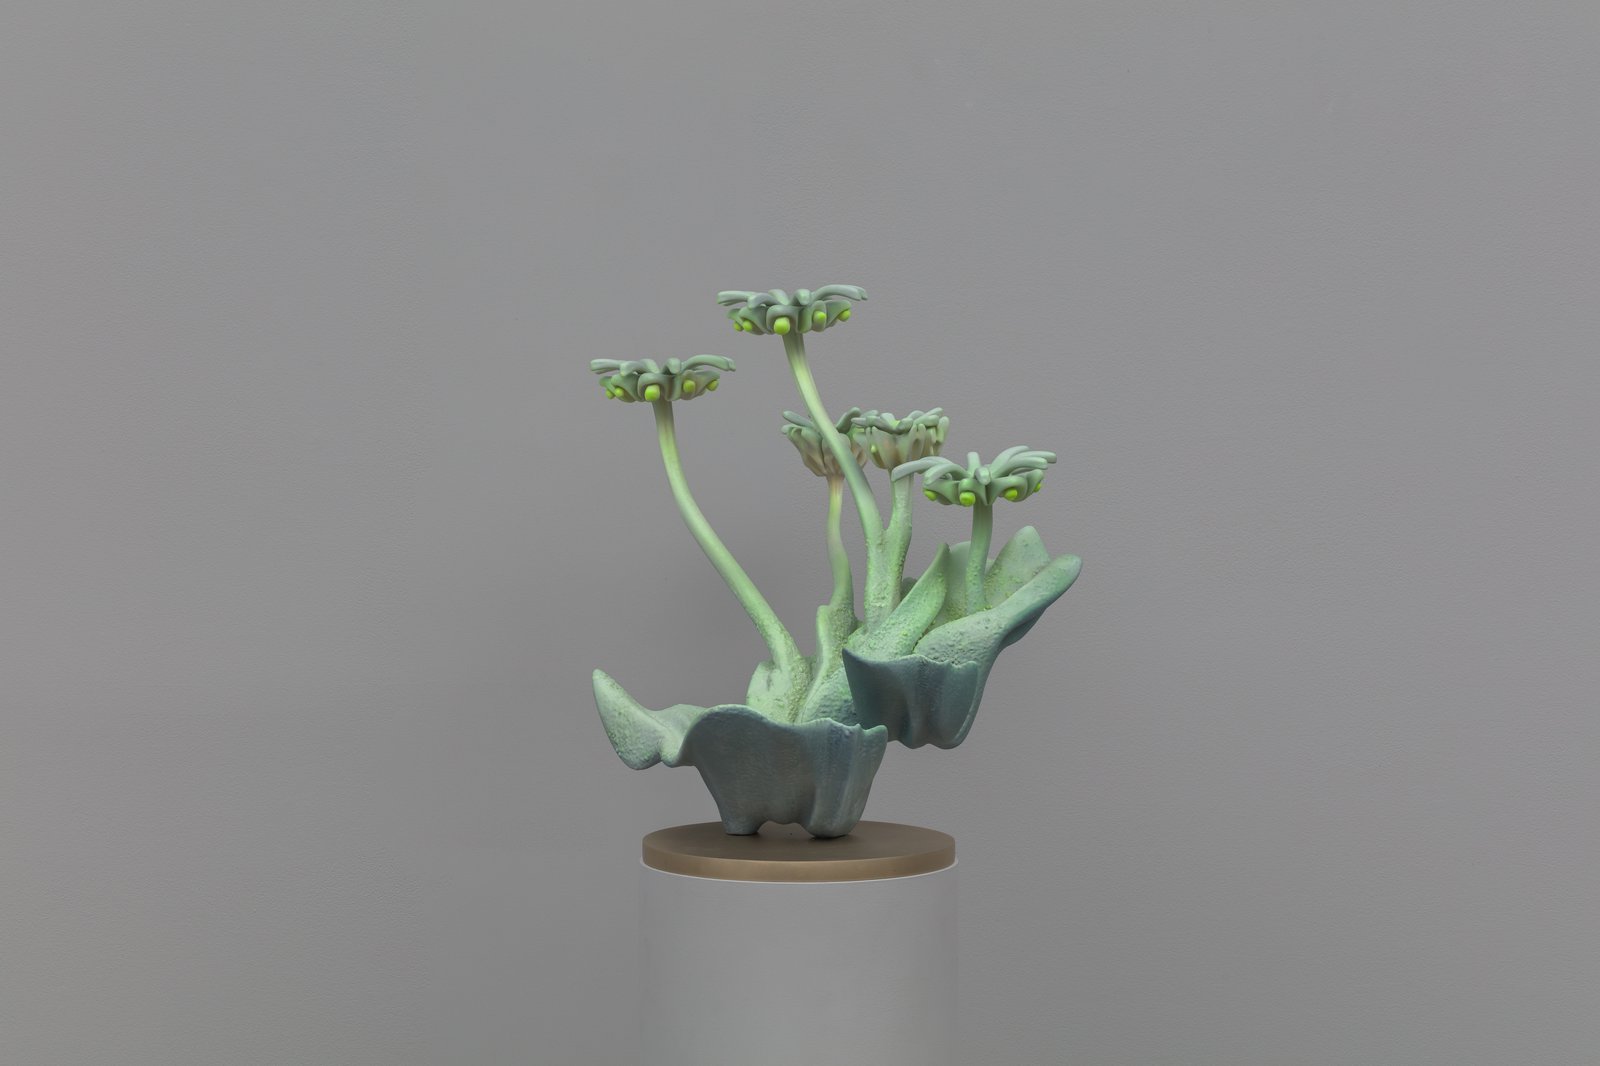 Marguerite Humeau, Marchantia, 2022, alternate view.Wax, sugars, mineral dust, glass, natural extracts, pigments, thermochromic pigments, plant-based and synthetic resin, nylon, bronze, work: 56 x 86.5 x 48.5 cm; overall: 151 x 86.5 x 48.5 cmCourtesy of the artist and CLEARING